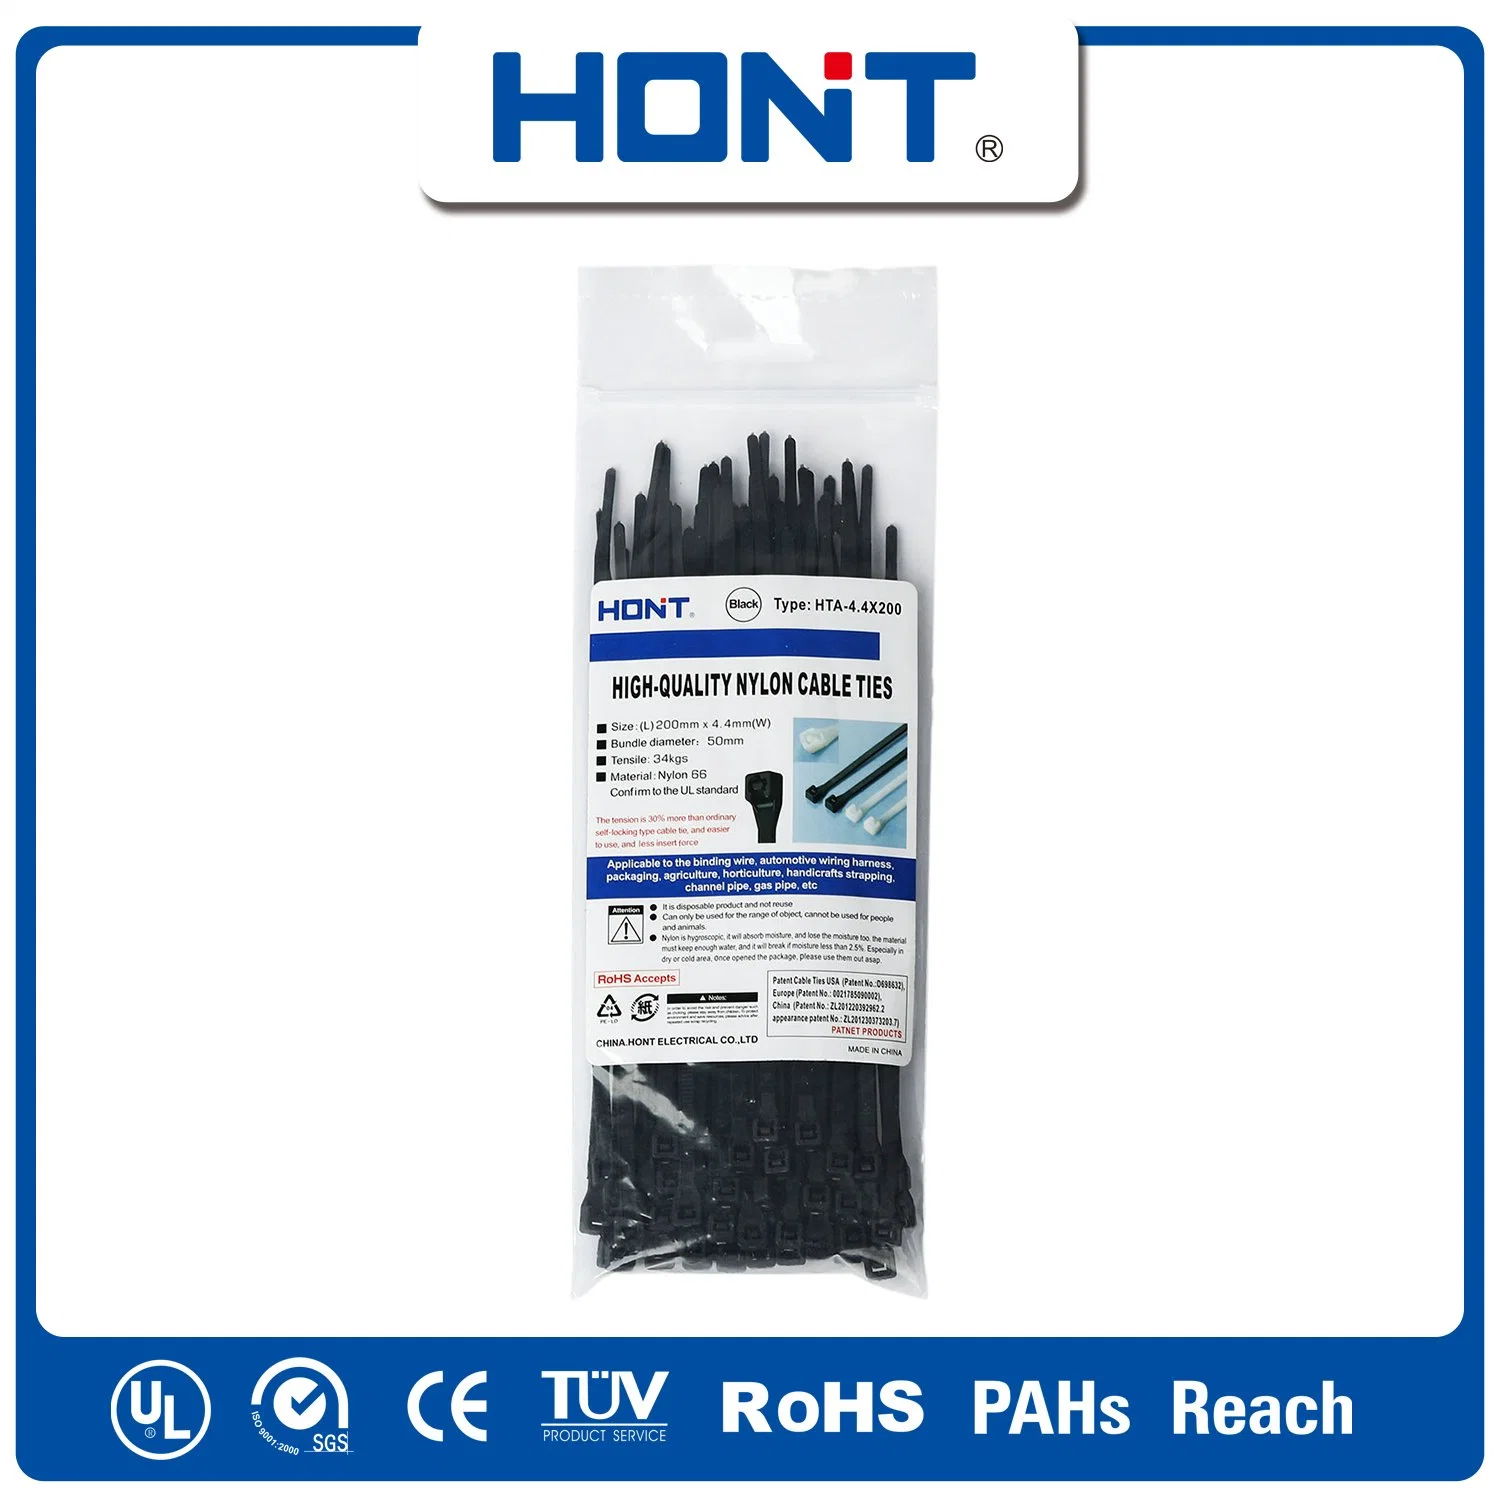 2.5/3.6/4.8/7.2/9/12 ISO Approved Hont Plastic Bag + Sticker Exporting Carton/Tray Label Tag Nylon Cable Tie